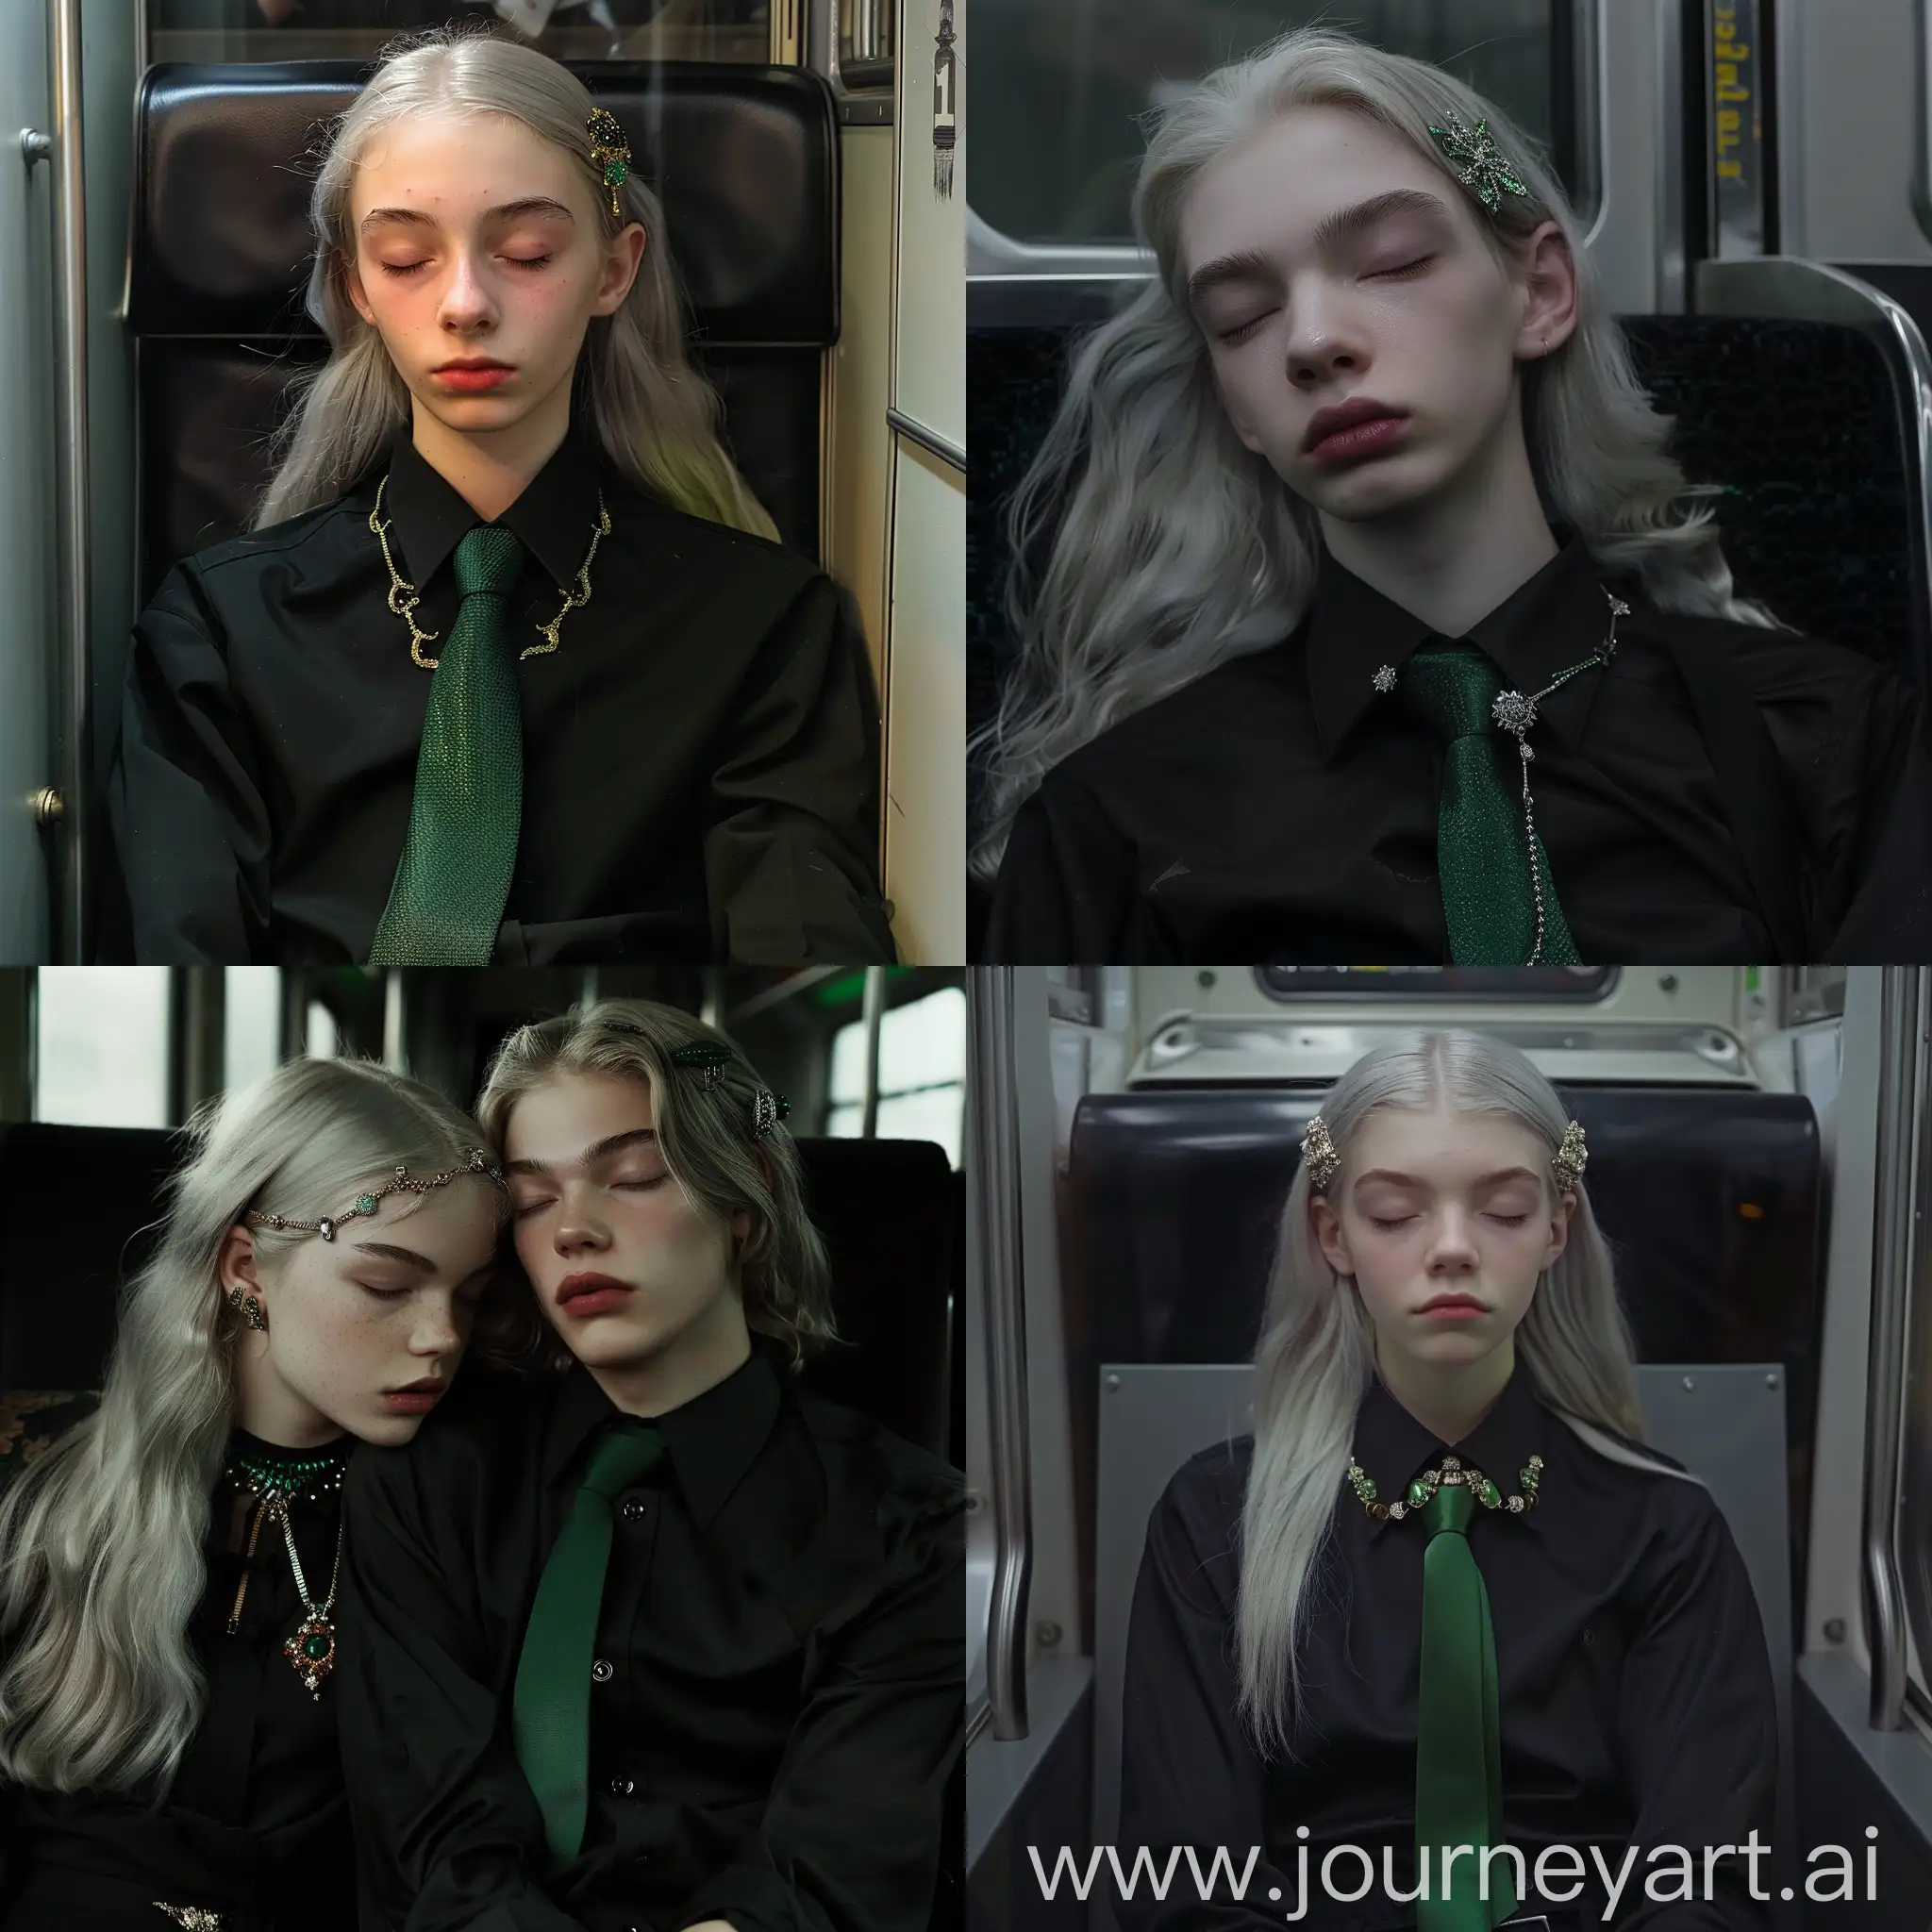 Elegant-Teenage-Girl-with-a-Subtle-Smirk-in-Train-Compartment